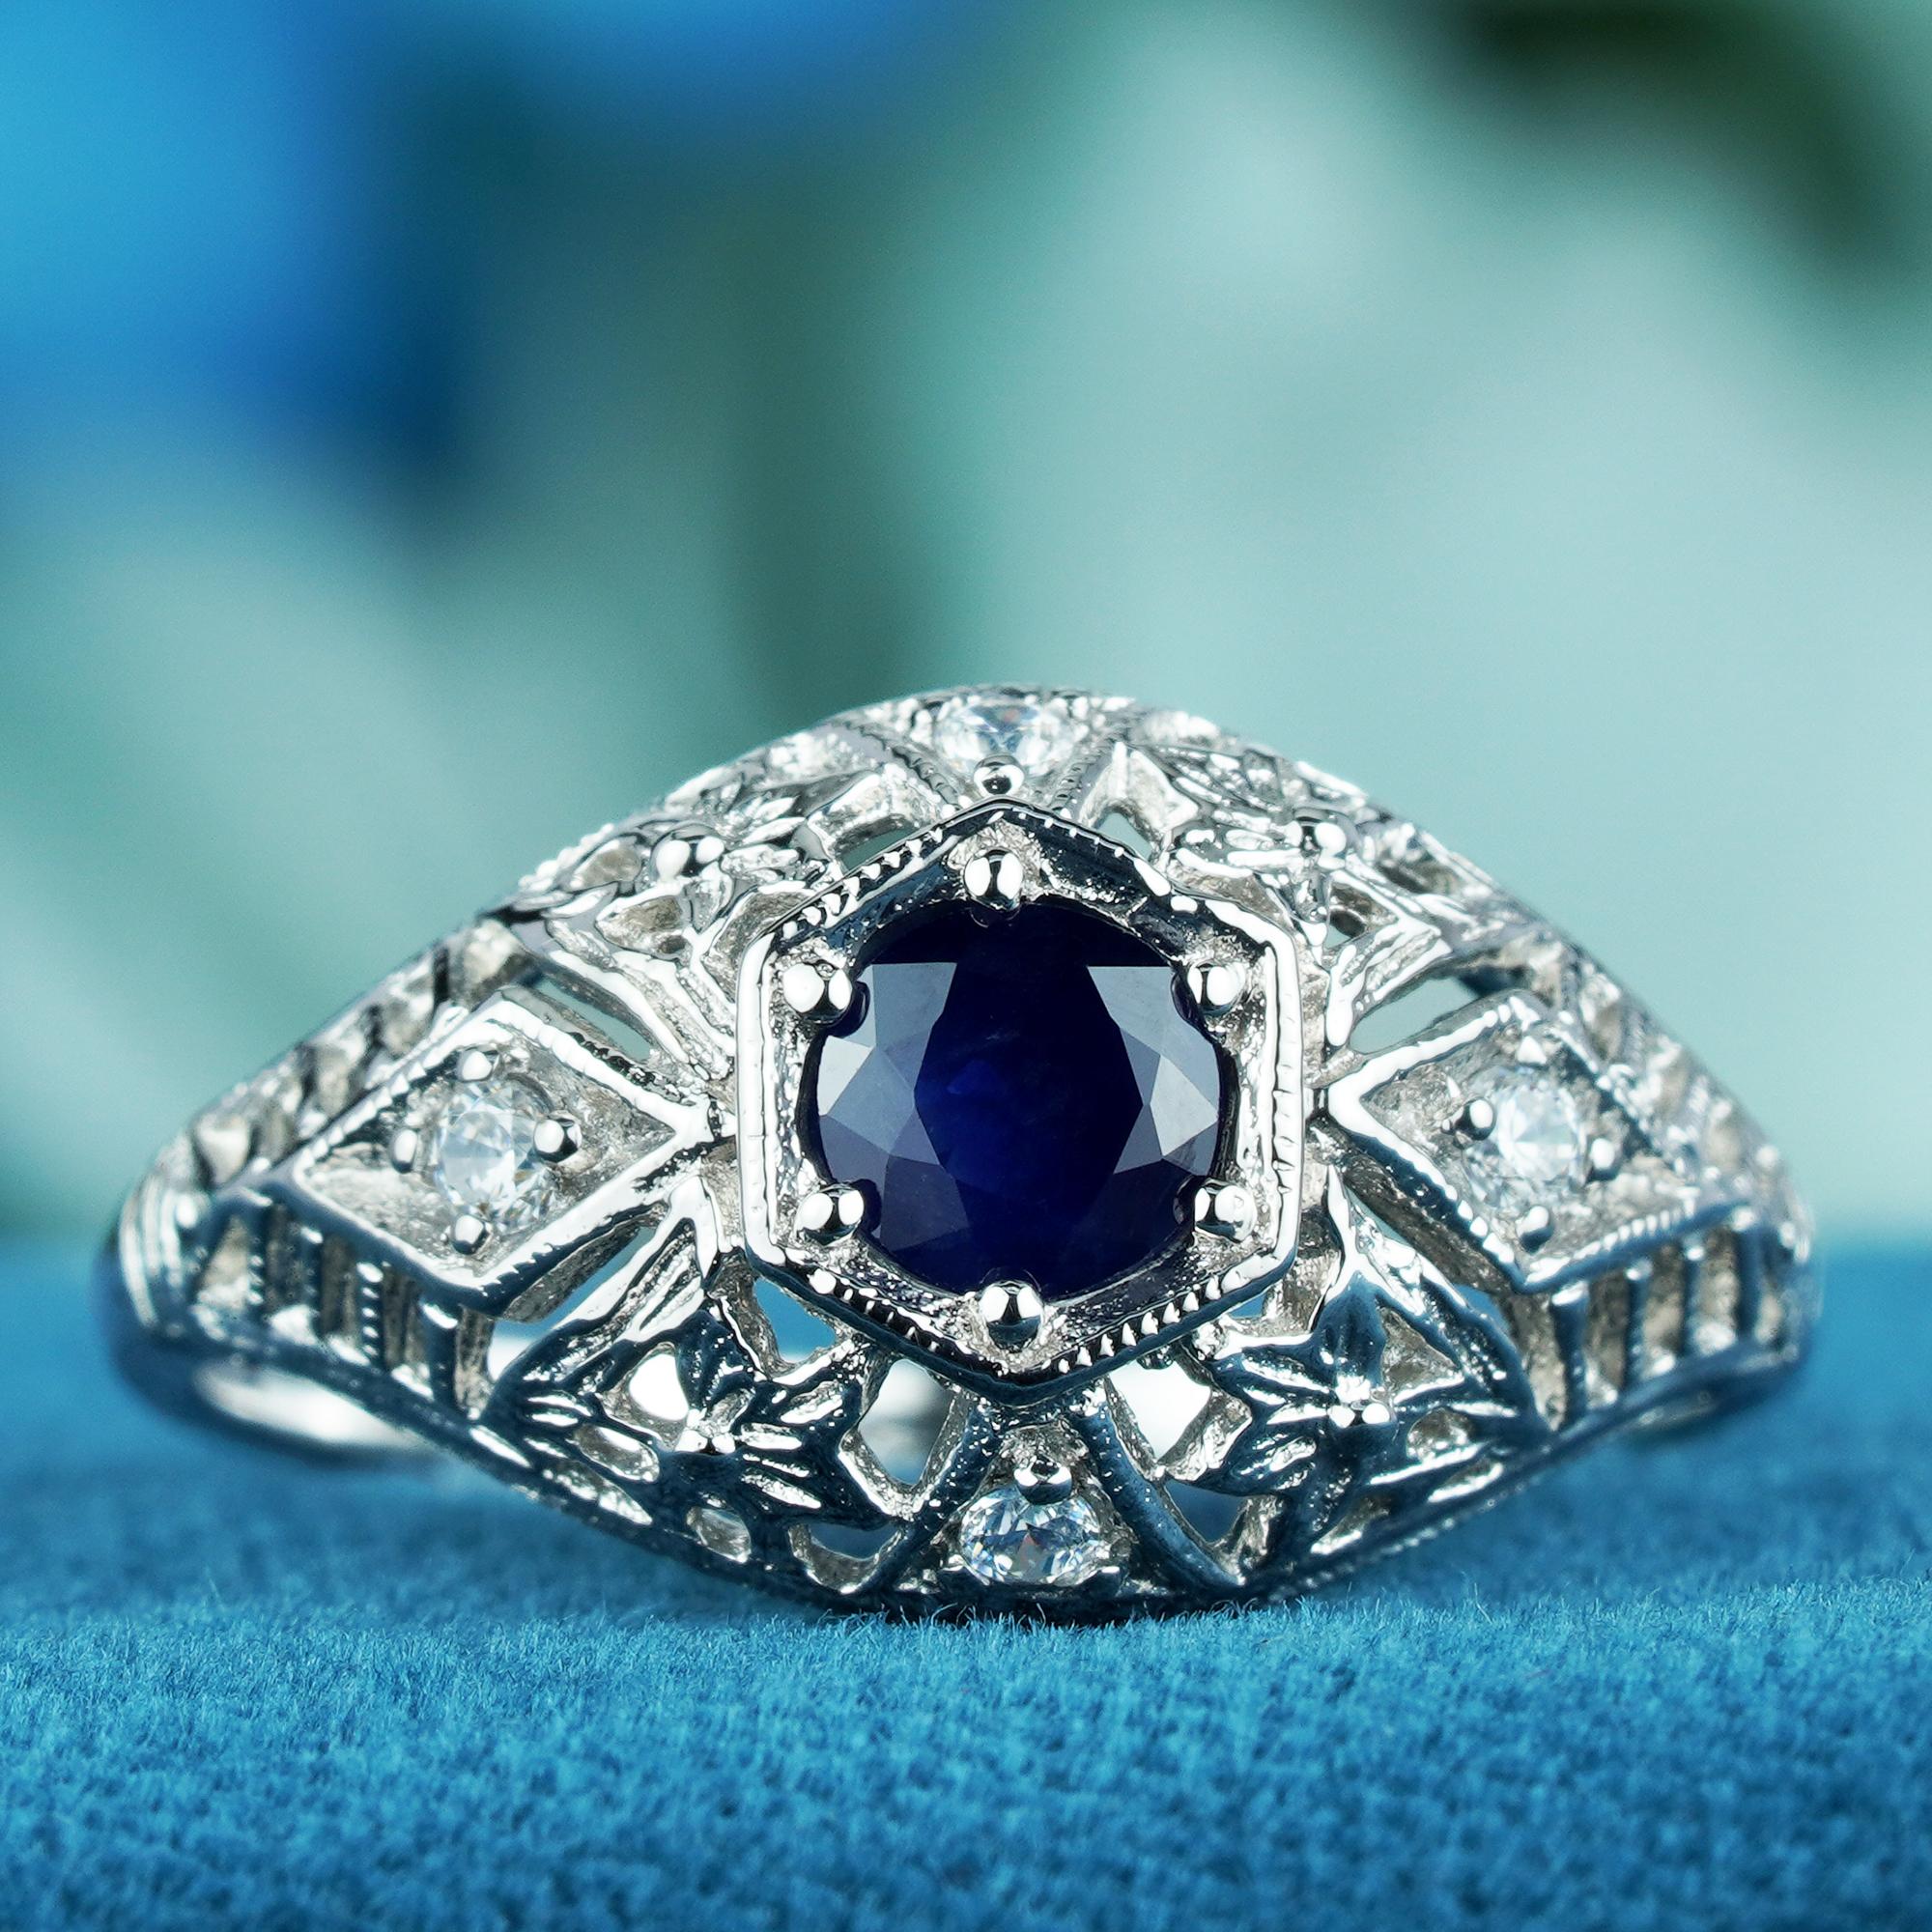 For Sale:  Natural Blue Sapphire Diamond Vintage Style Filigree Ring in 9K White Gold 3